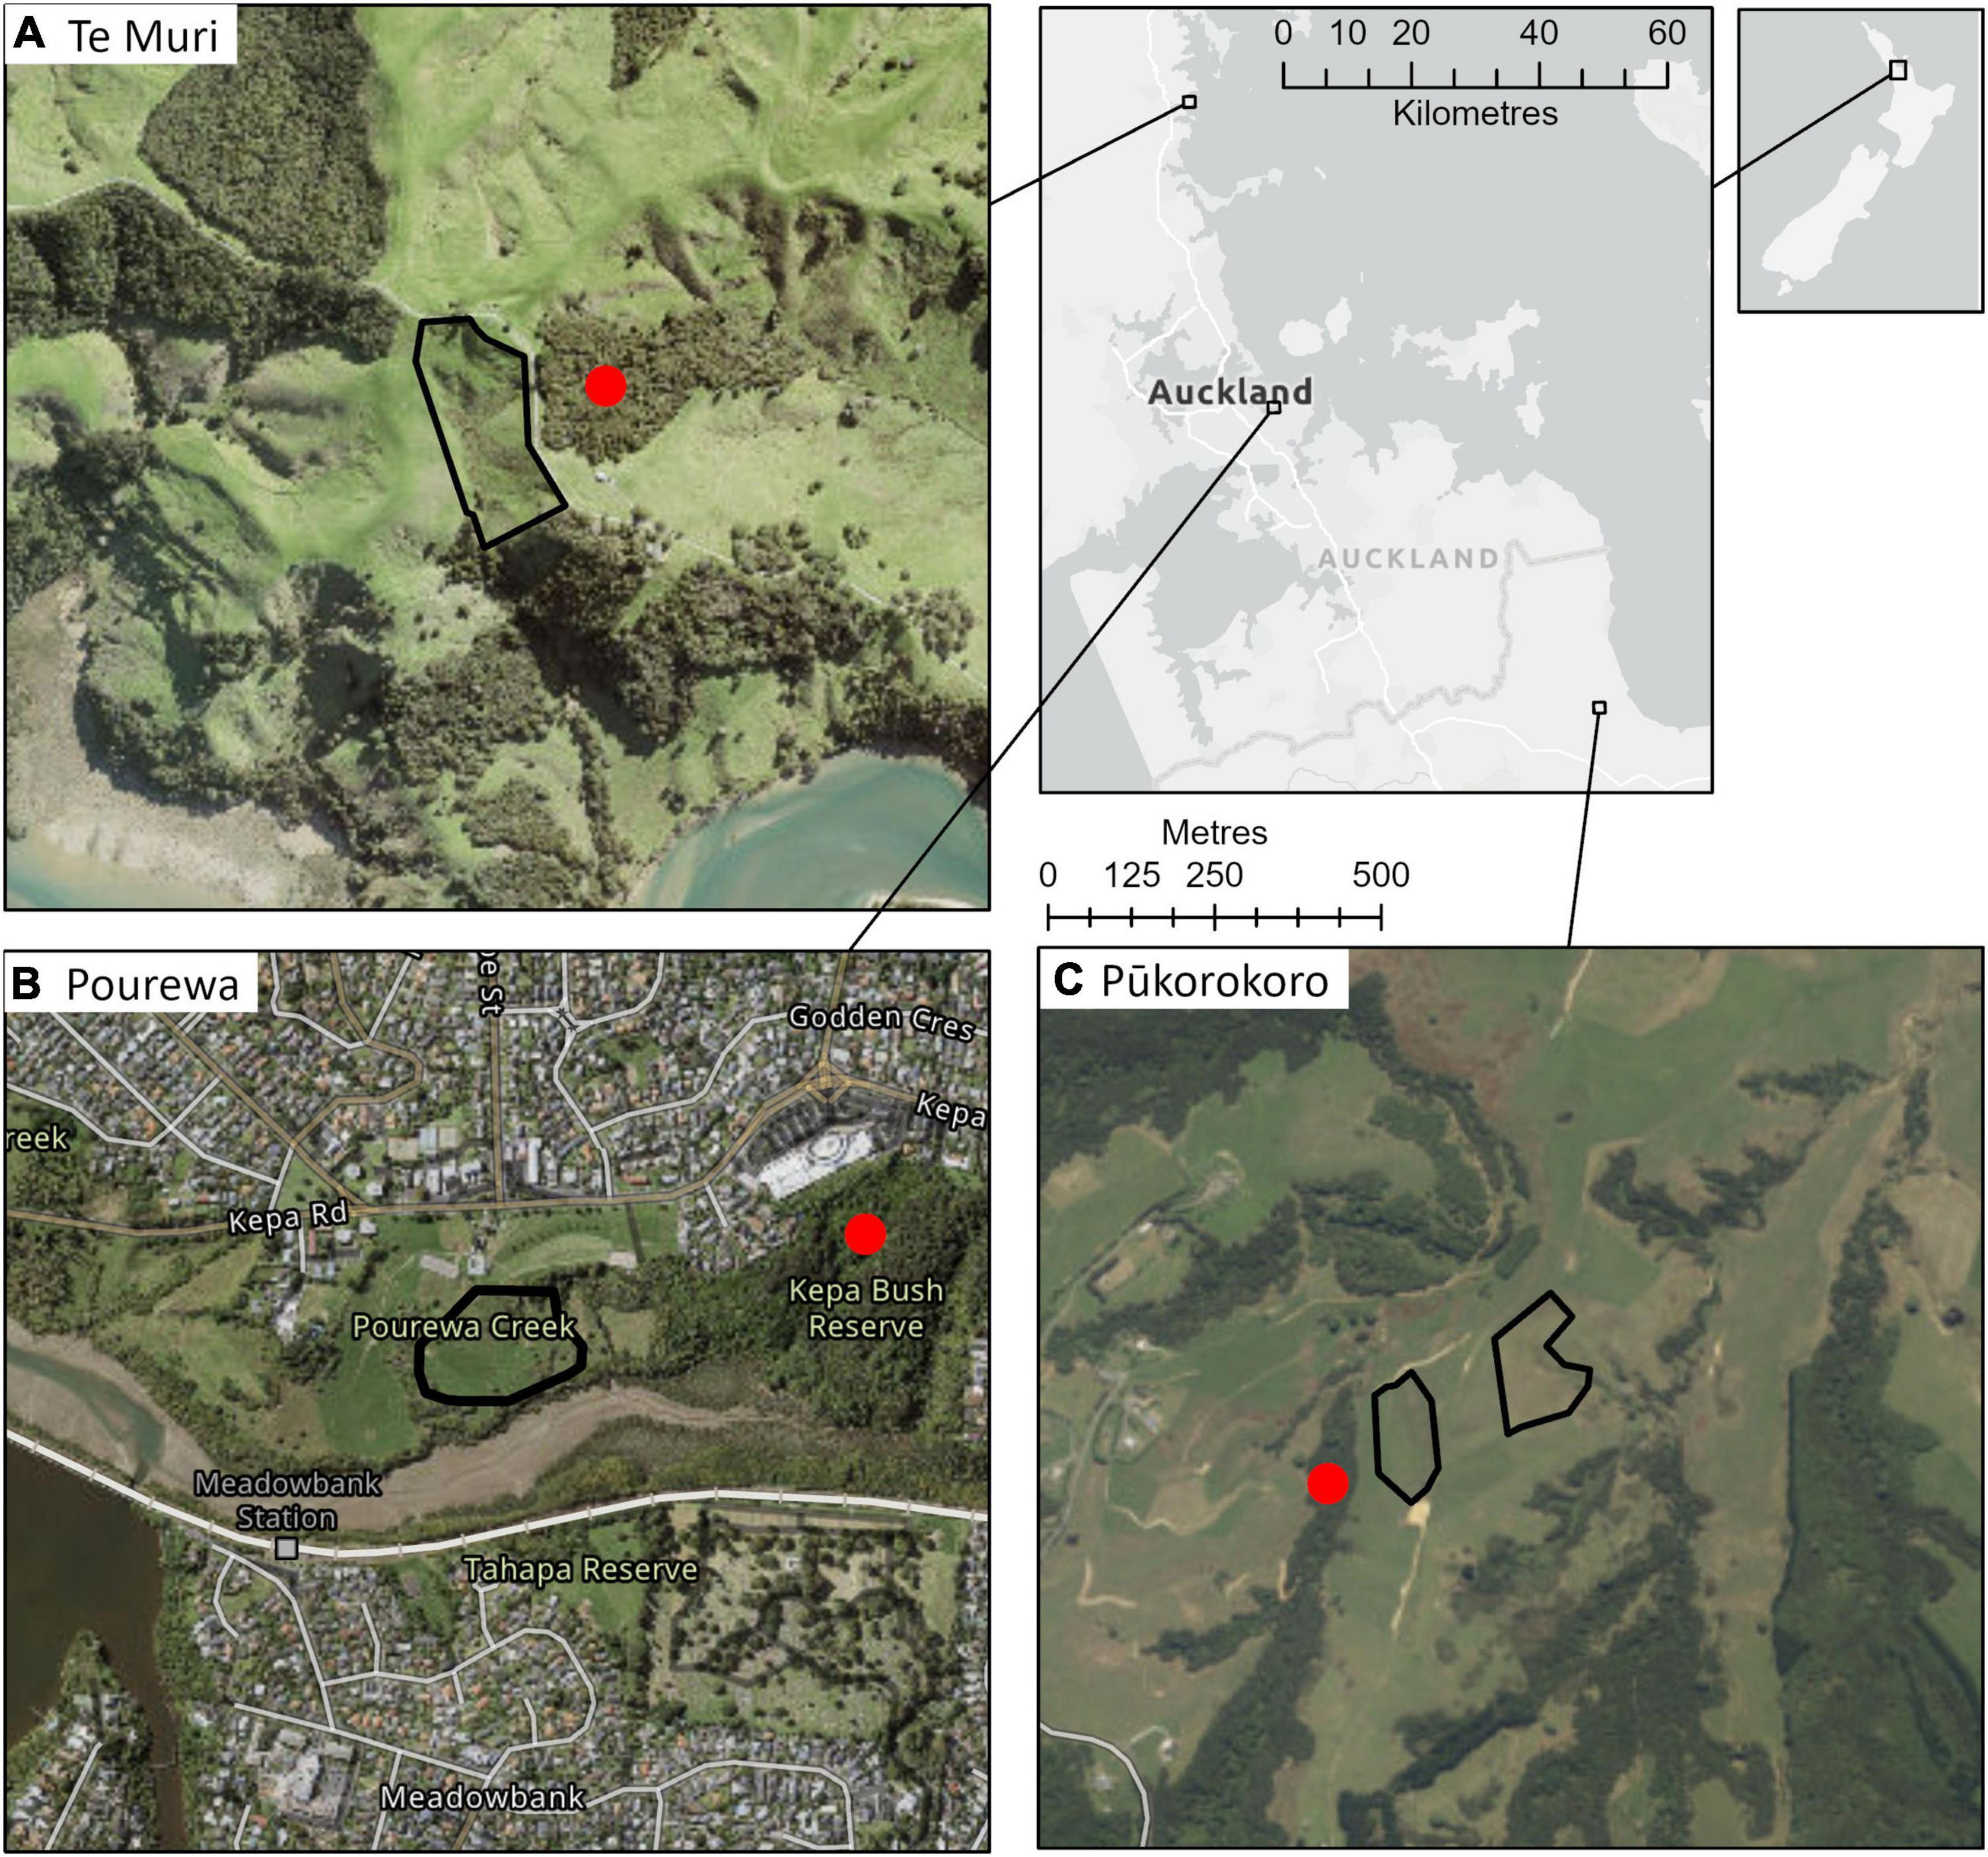 Using long-term experimental restoration of agroecosystems in Aotearoa New Zealand to improve implementation of Nature-based Solutions for climate change mitigation